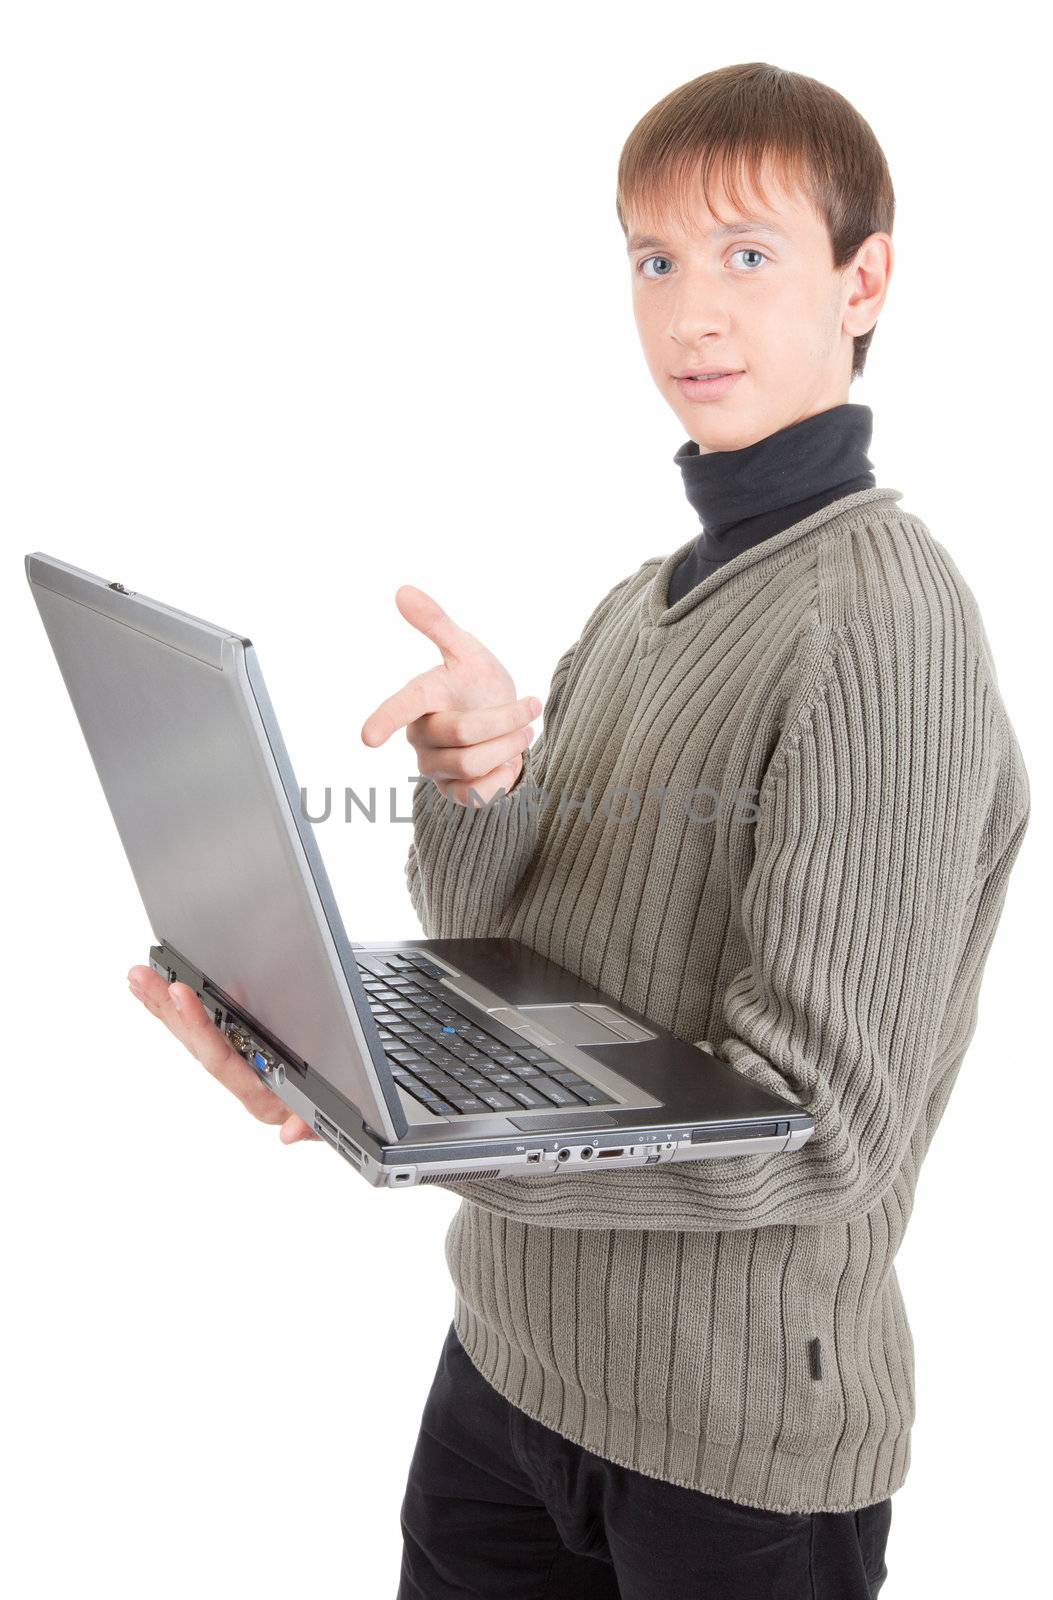 young man  handing  laptop on white background